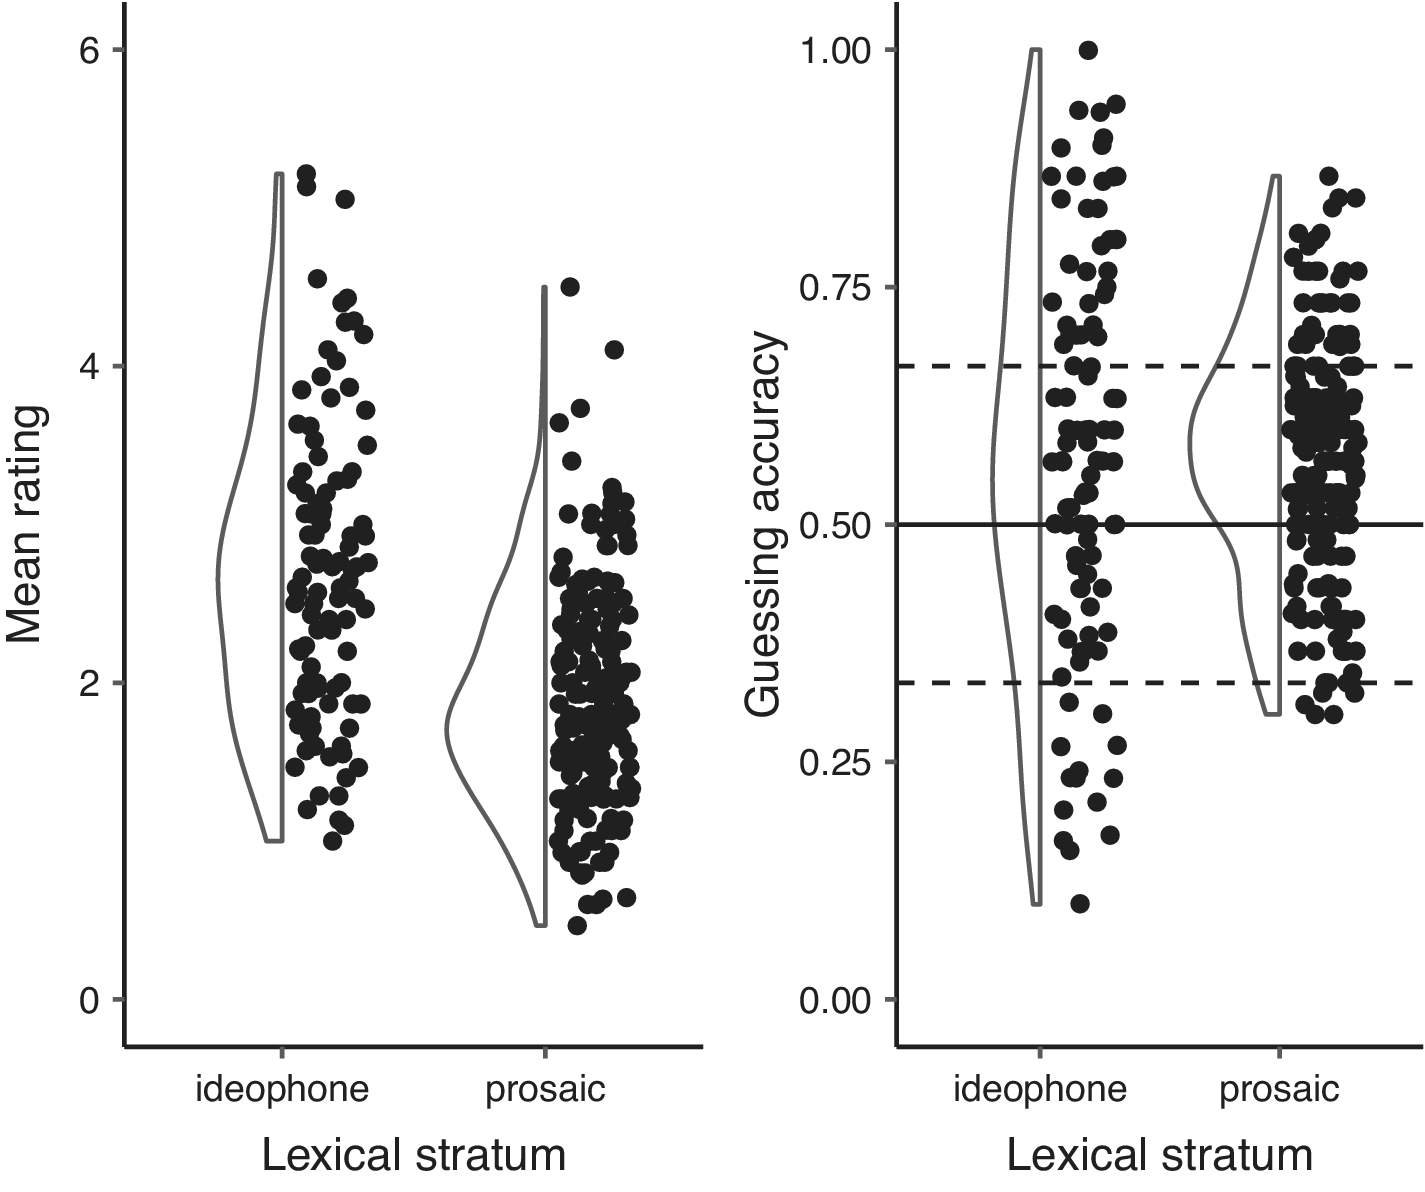 The right plot shows guessing accuracies for ideophones and prosaic words. Both ideophones and prosaic words are guessed above chance, though more ideophones are guessed above chance than prosaic words, and also more ideophones are guessed *below* chance than prosaic words.